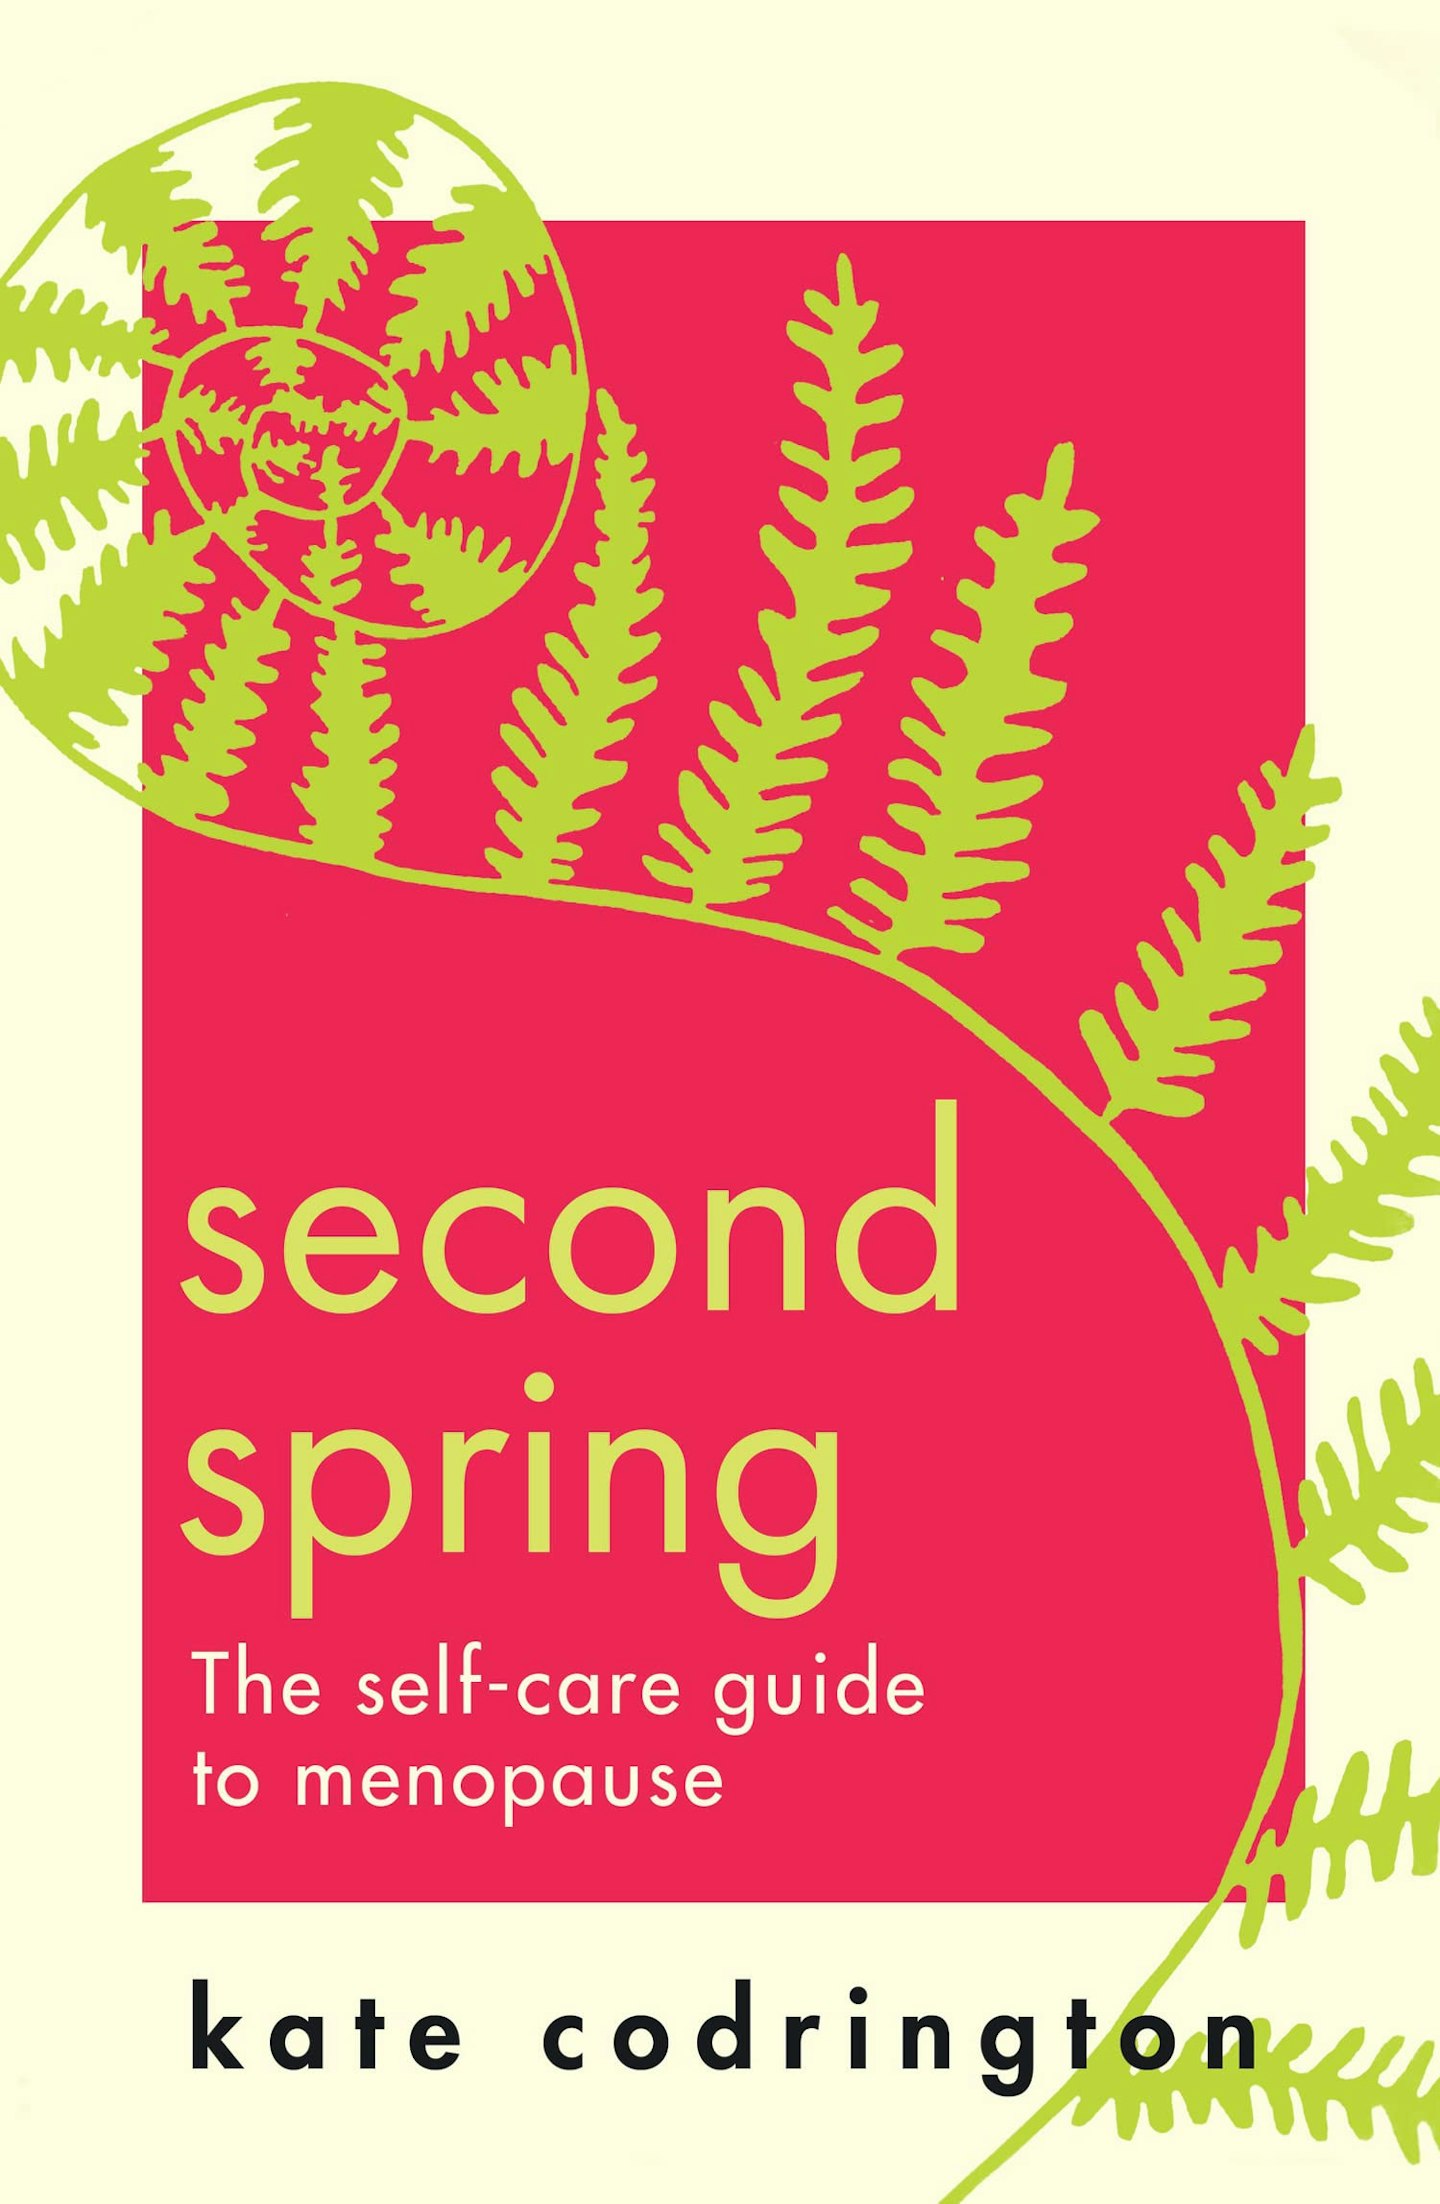 Second Spring: The Self-care Guide To Menopause by Kate Codrington